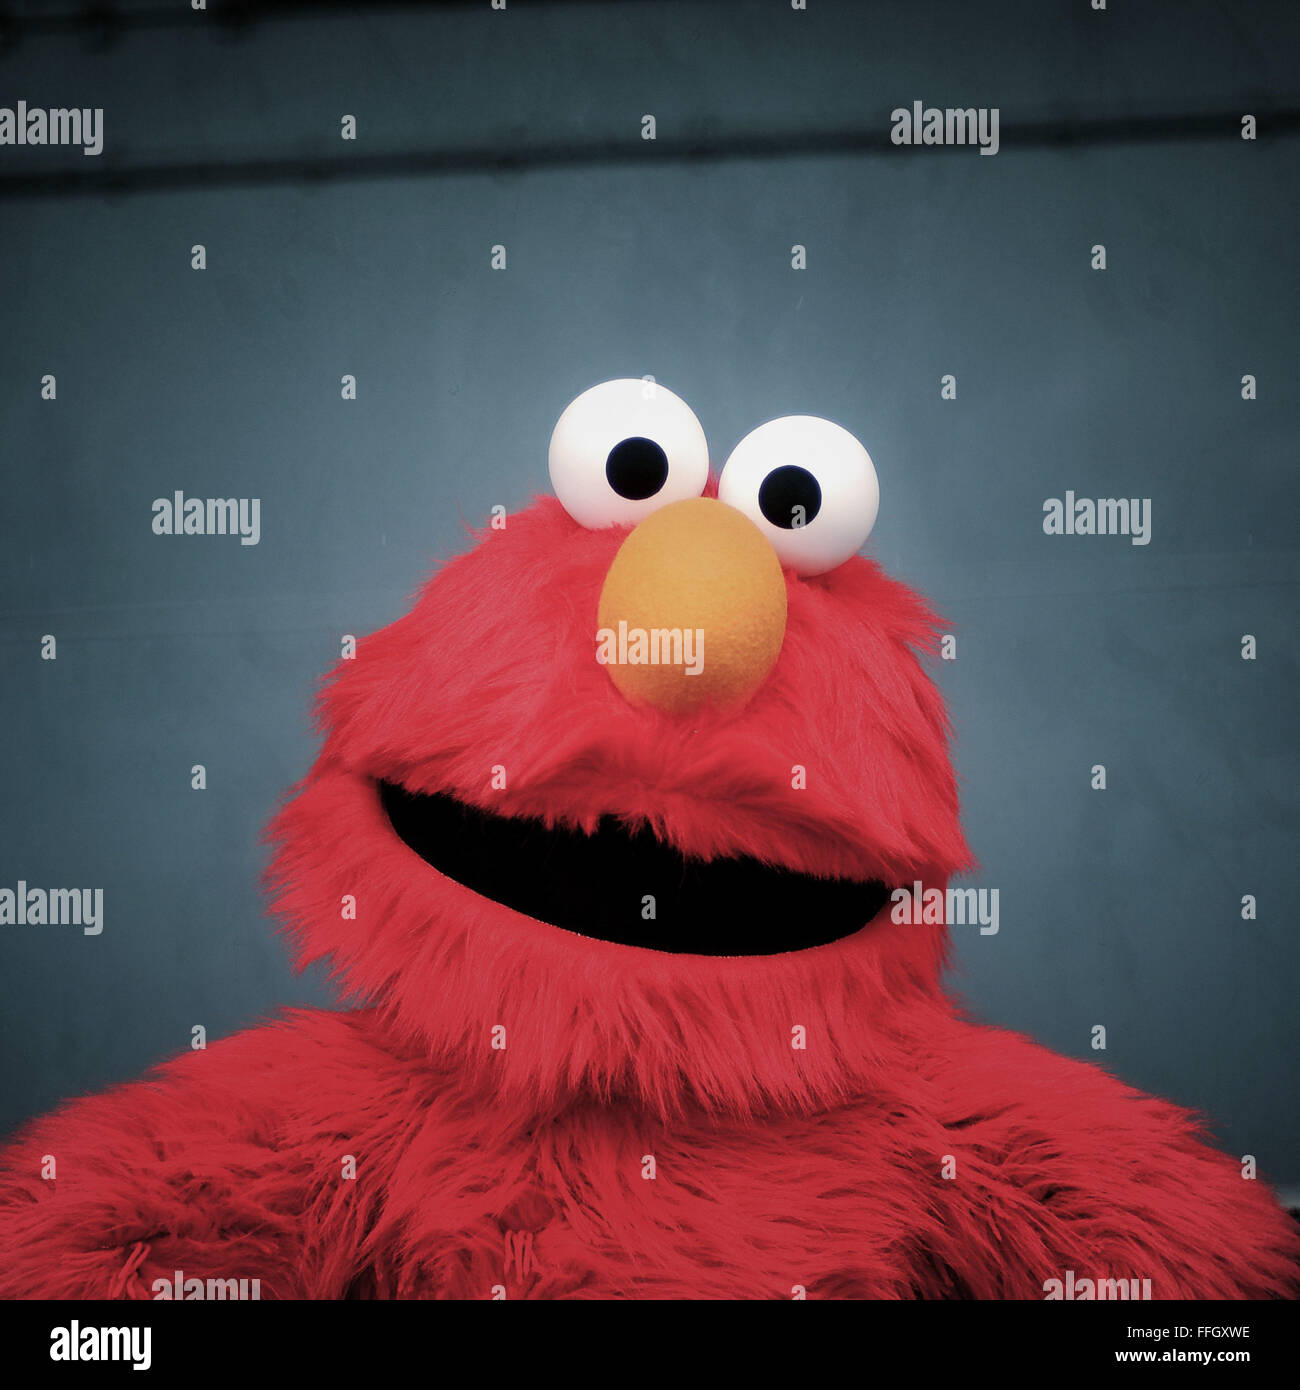 Name: Elmo Where they are from: Sesame Street Reason for visiting: To see  the kids at Air Force Week Stock Photo - Alamy